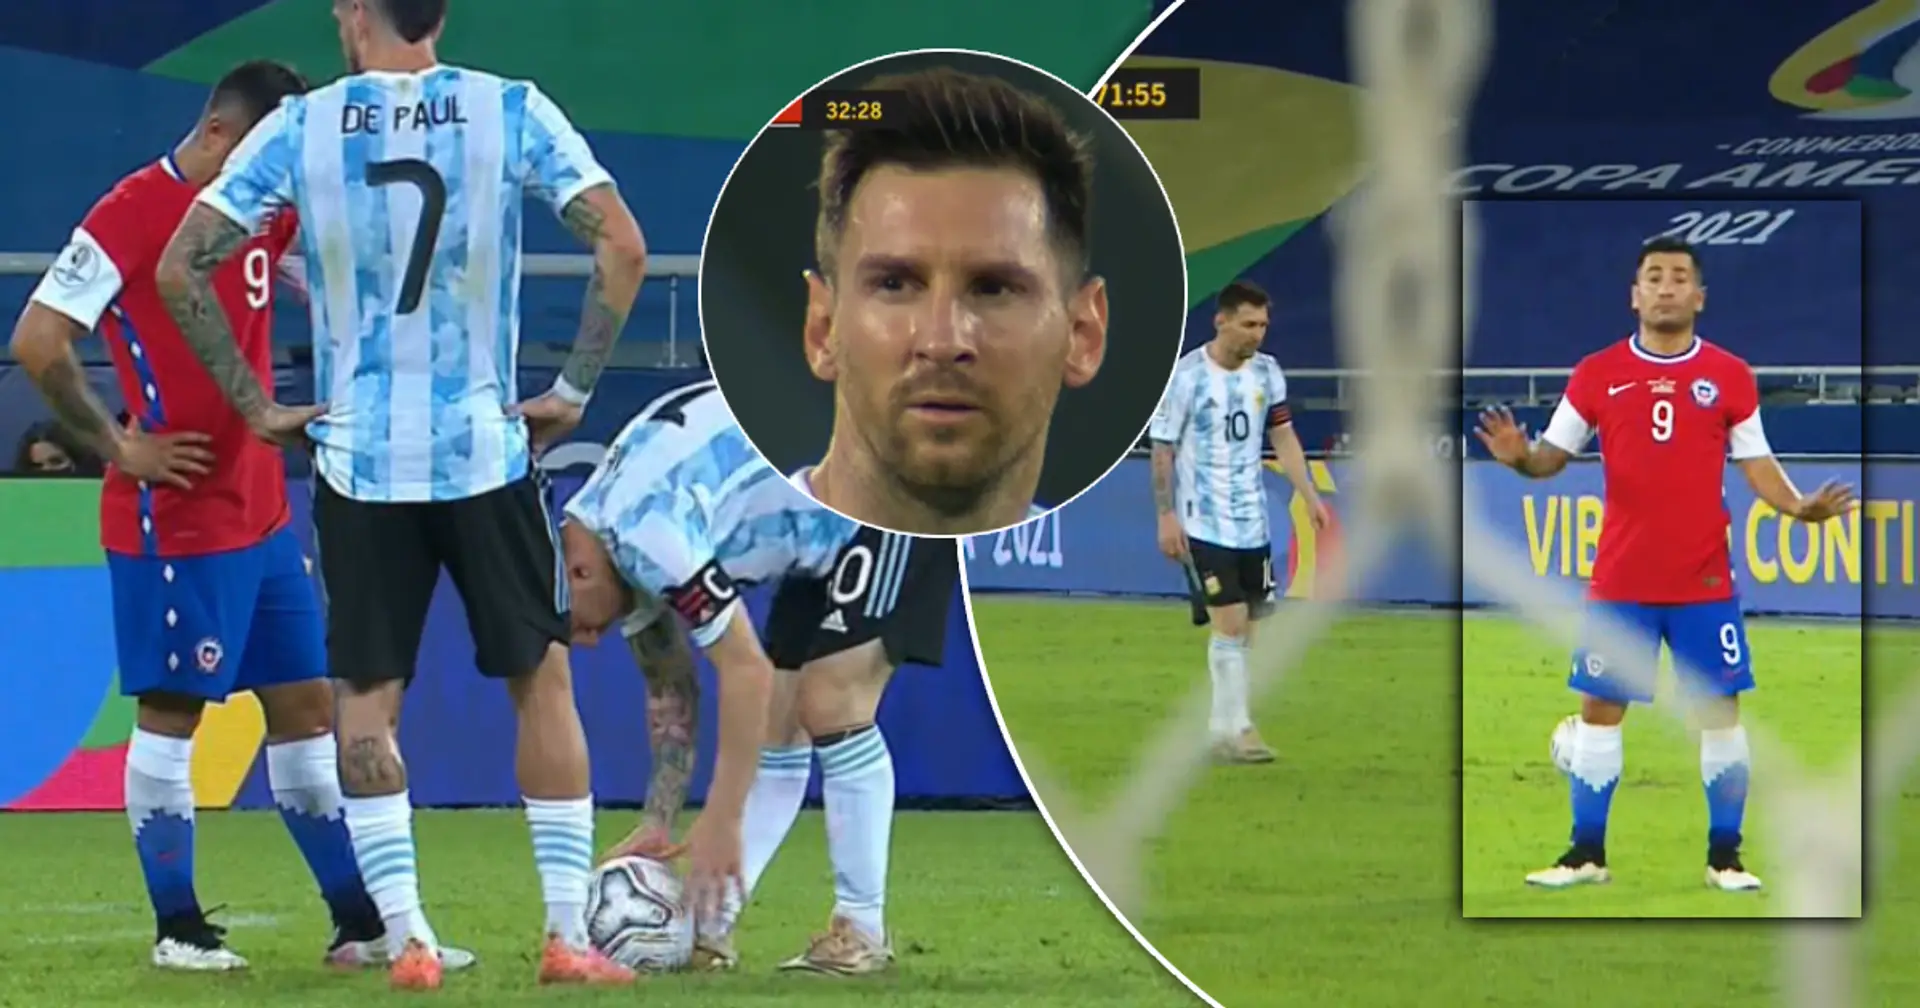 Jean Meneses tries to disrupt Messi's free-kicks twice but Leo silences Chile sh**talker with well-mastered strike